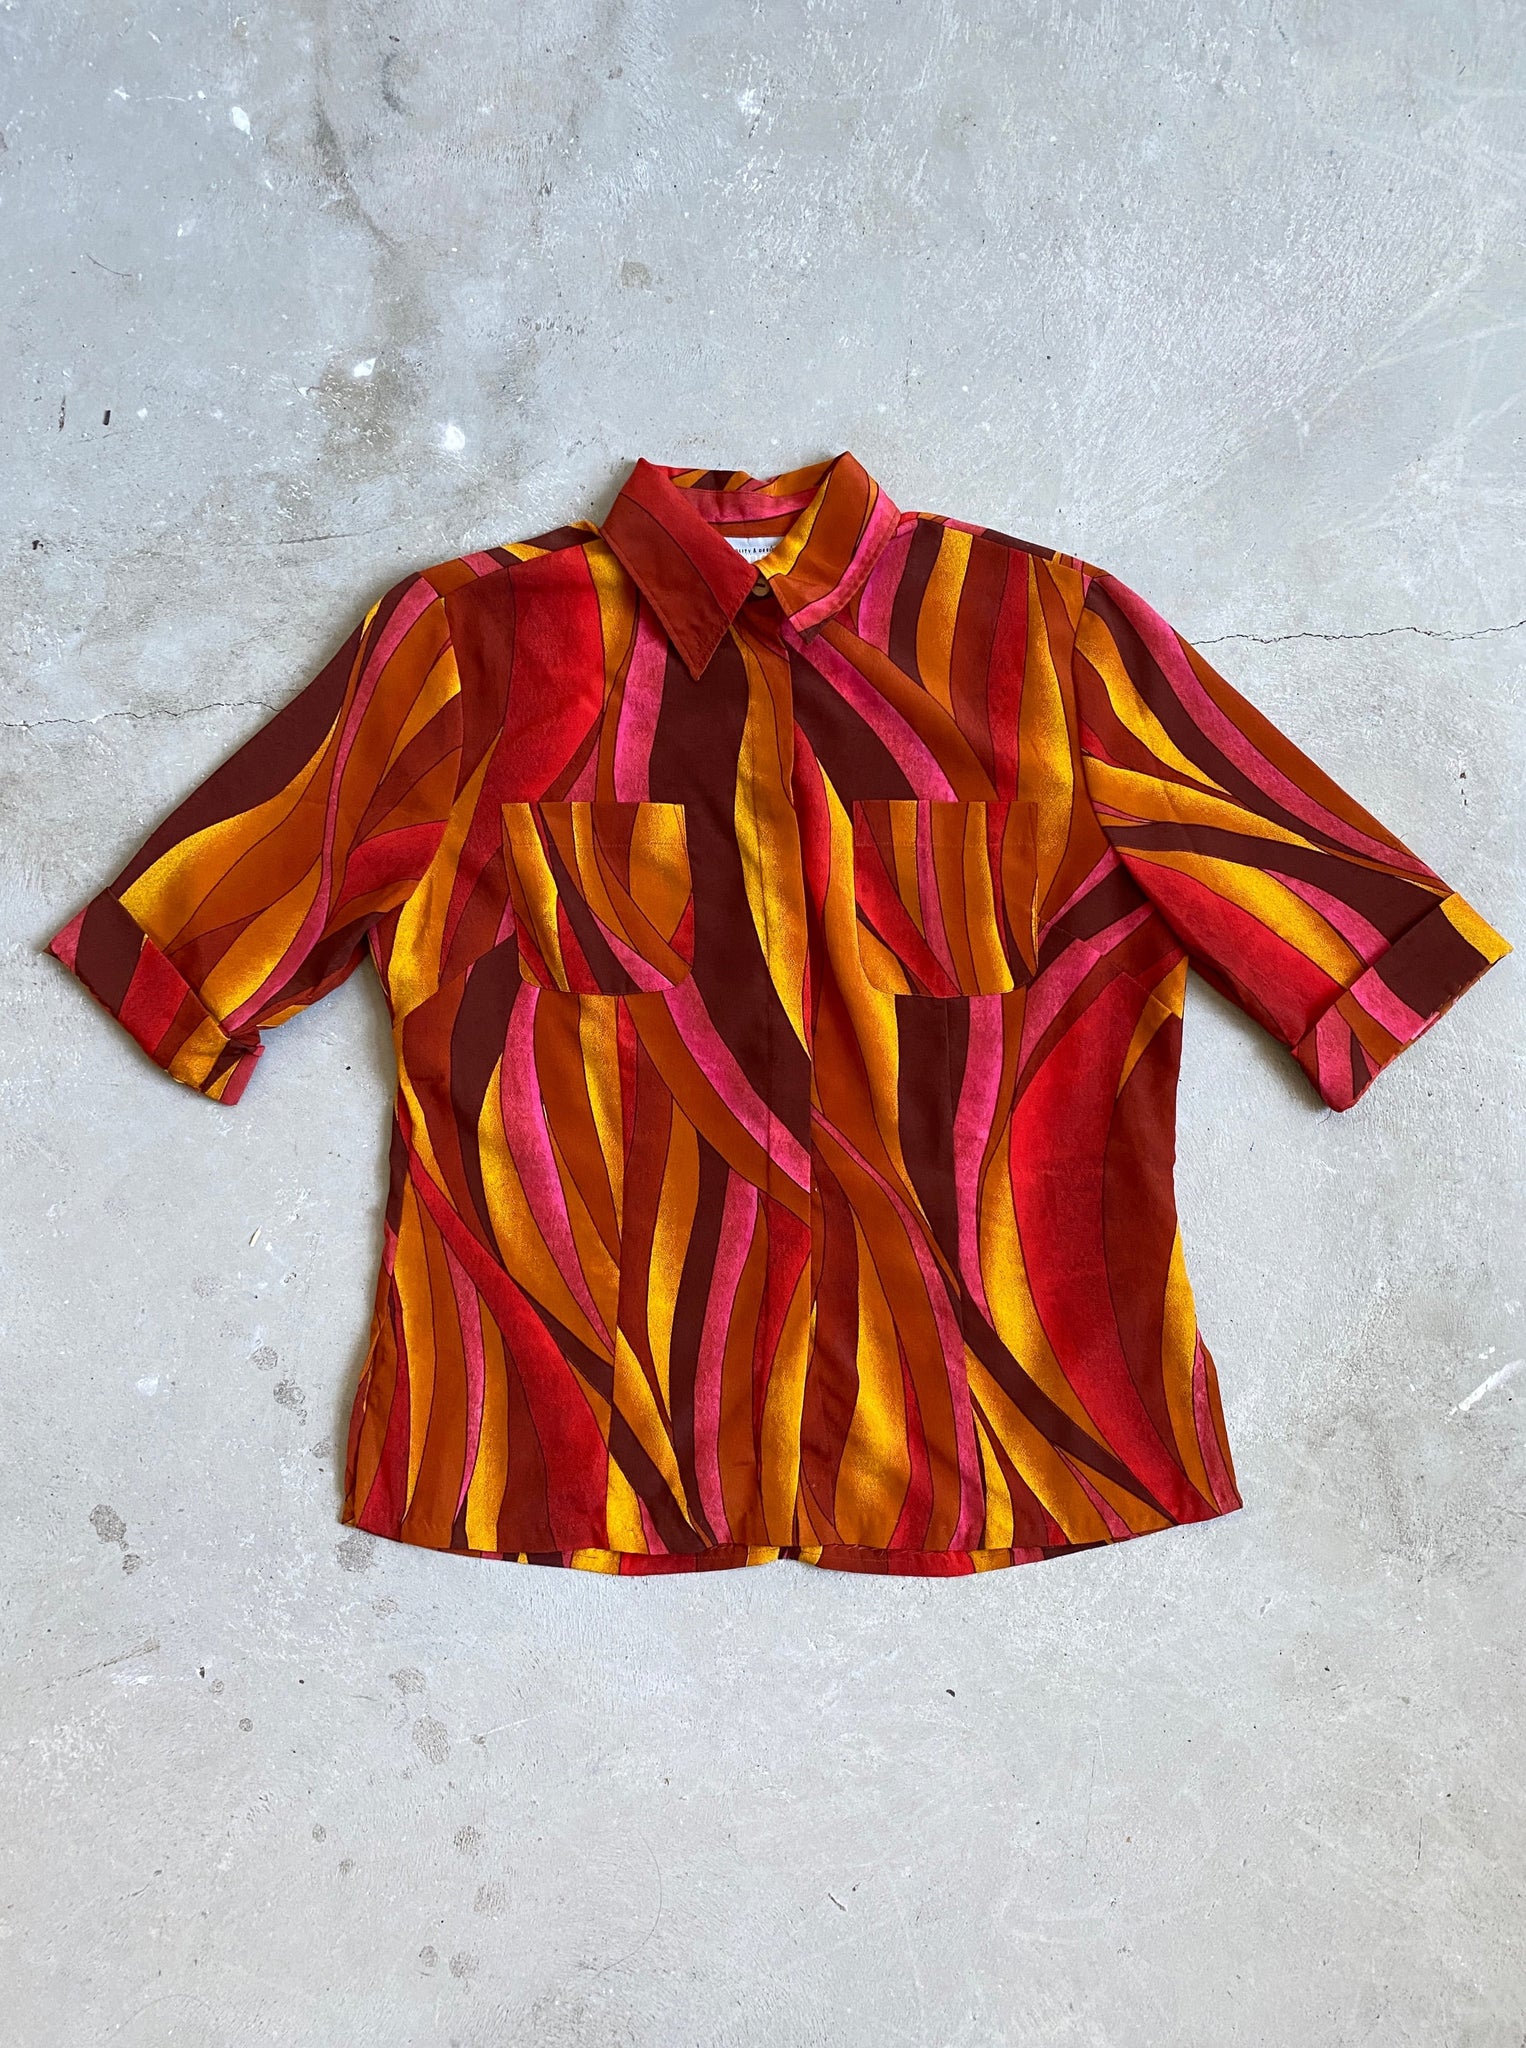 70's Inspired Red, Yellow, and Orange Printed Button Down (M)